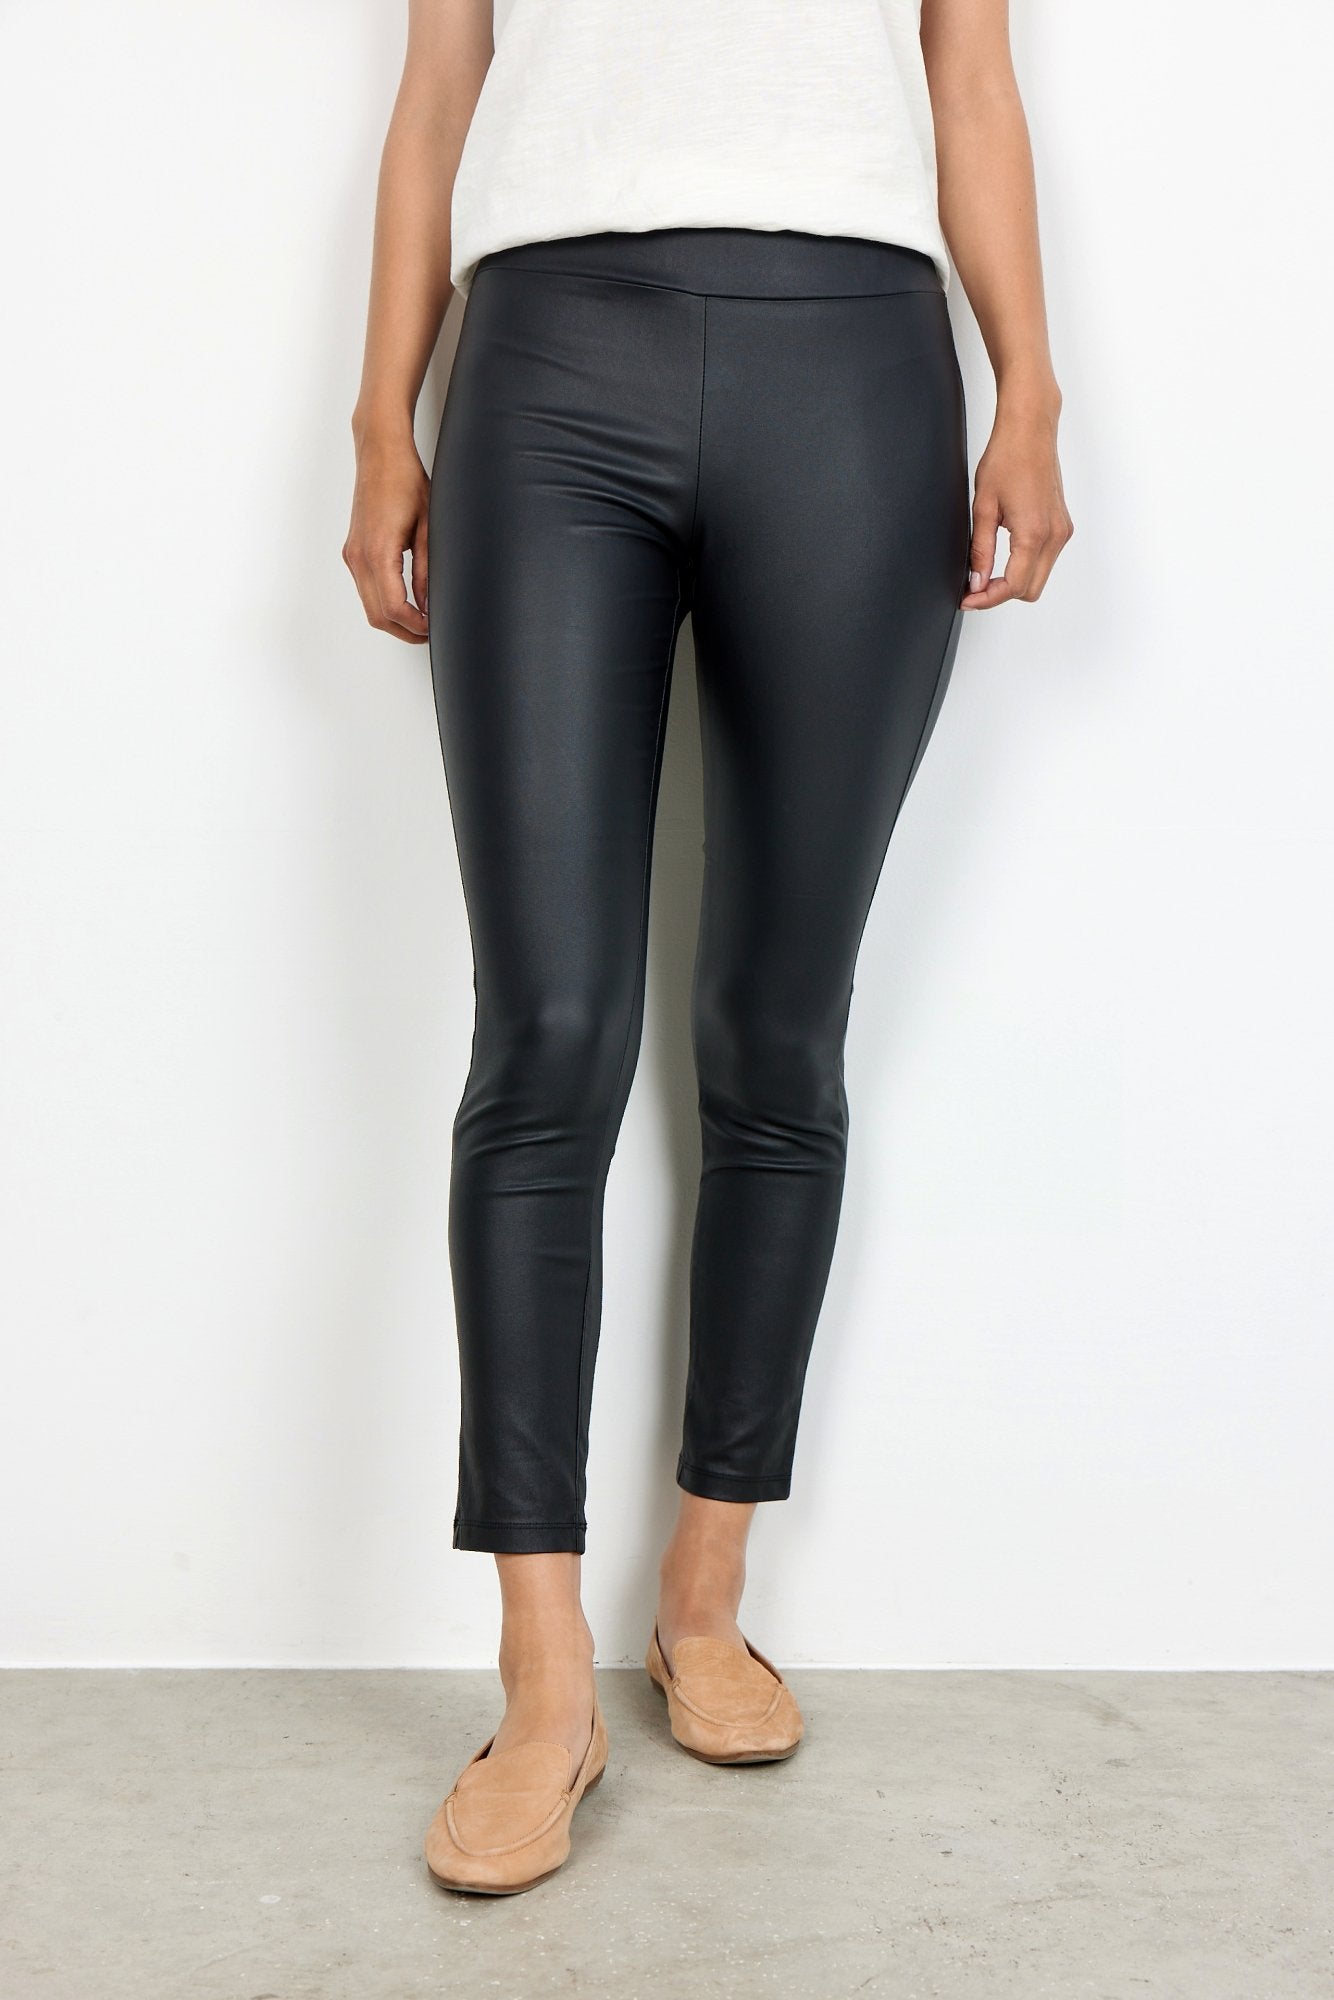 SC-PAM 2-B Pants in Black – soyaconcept Soyaconcept | soyaconcept from